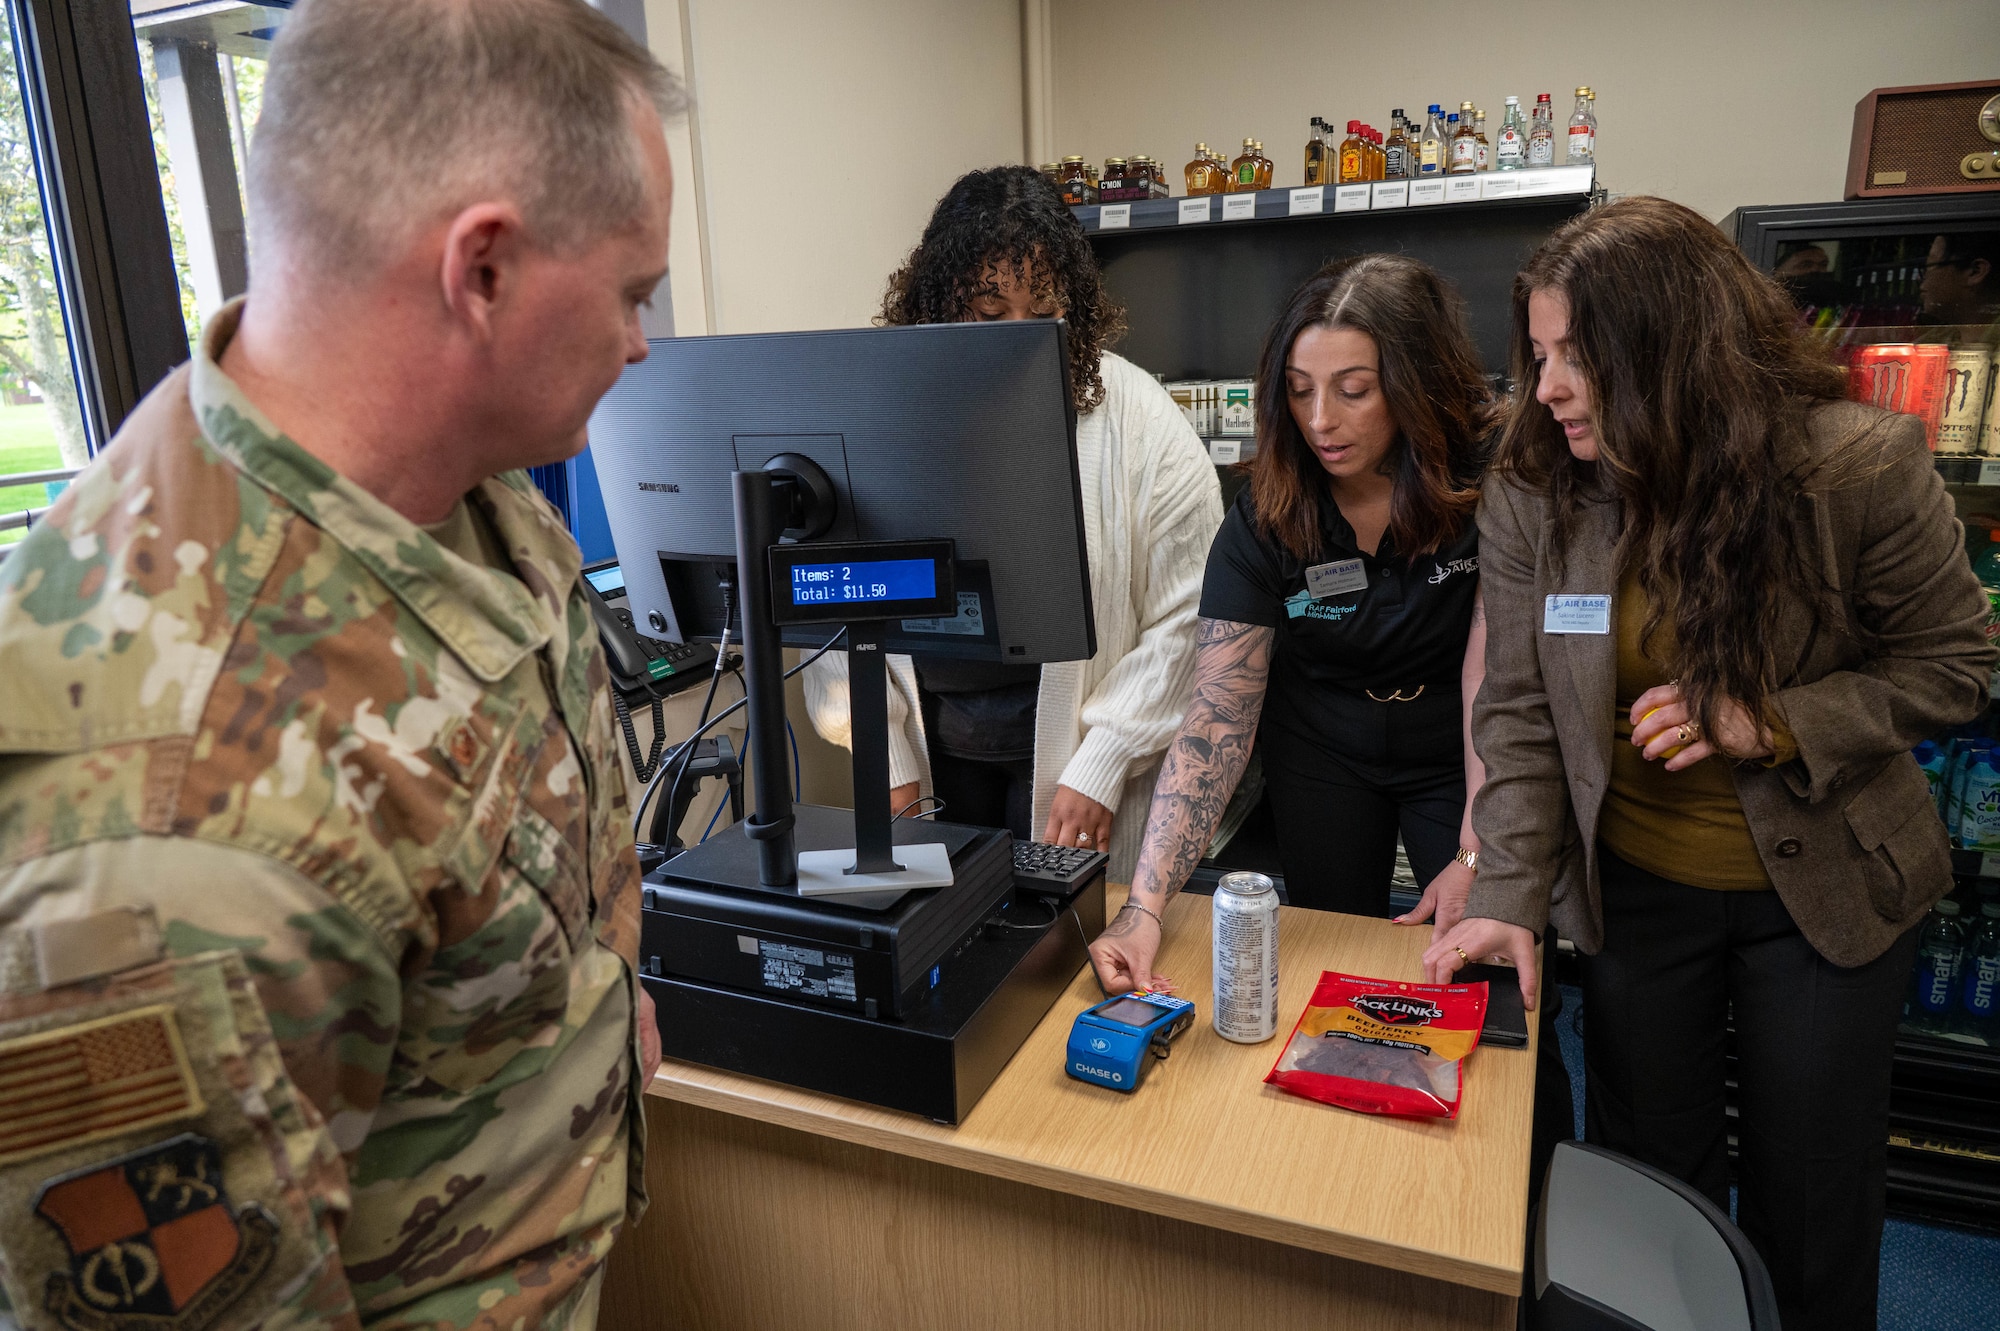 Airman makes the first official purchase from the newly opened Mini-Mart